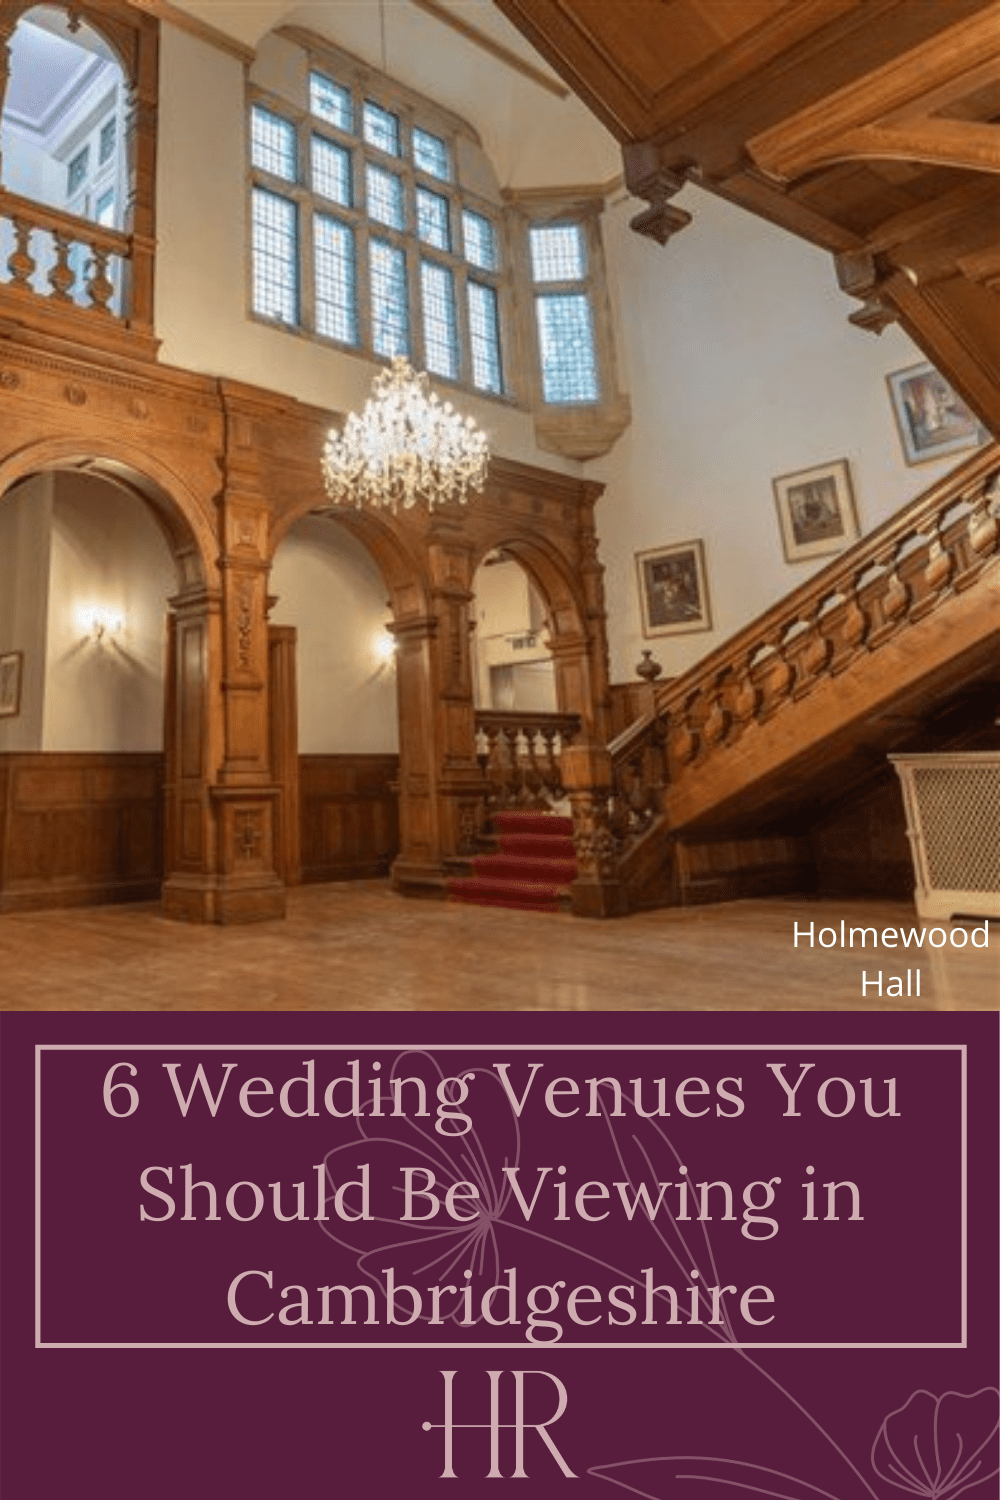 6 Wedding Venues You Should Be Viewing in Cambridgeshire